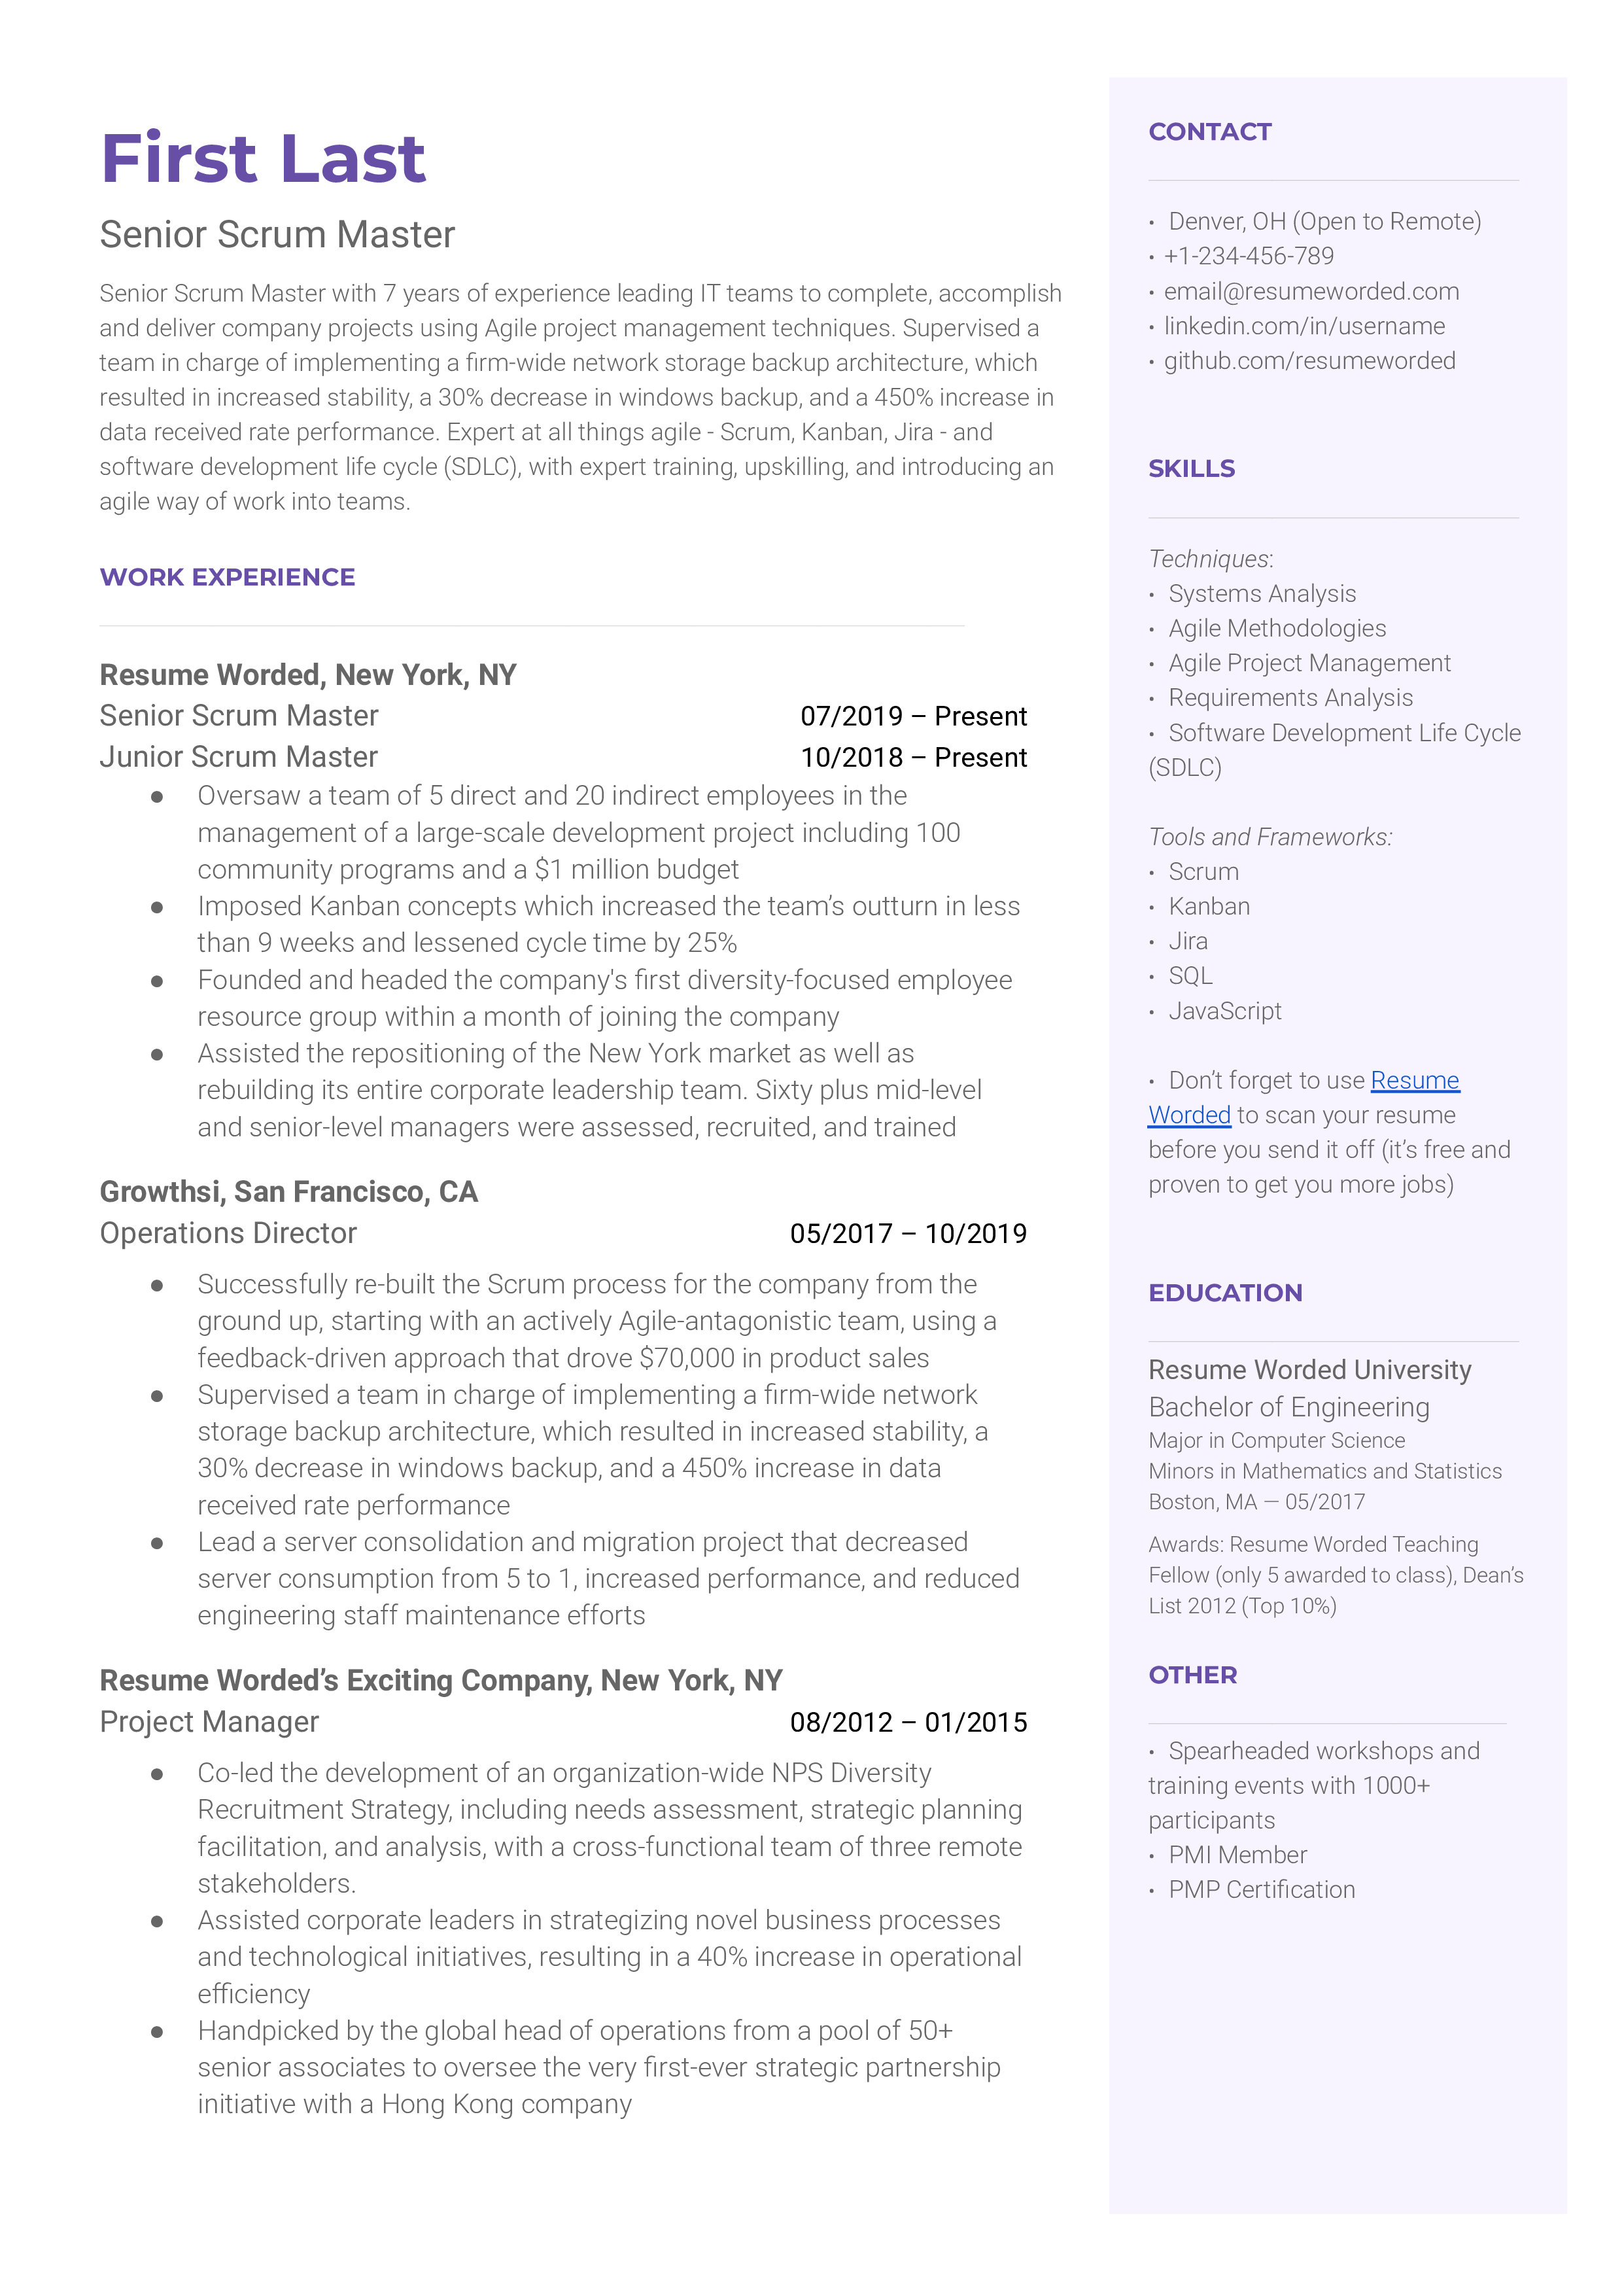 A senior scrum master resume with examples of longevity and promotion, bullet points with measurable achievements, and education to supplement the experience. 